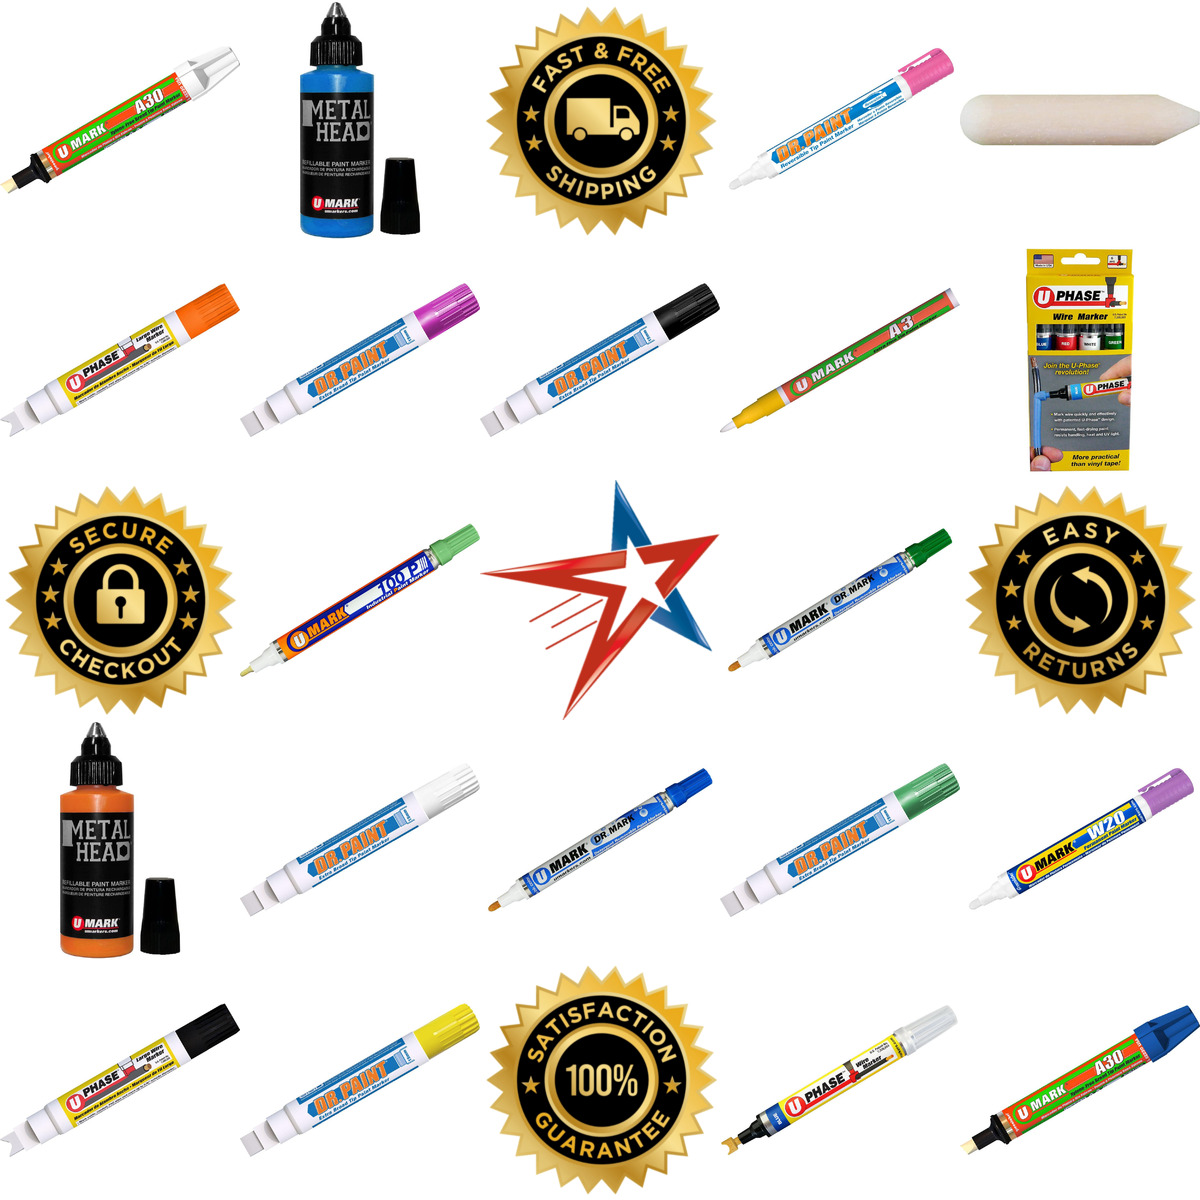 A selection of u Mark products on GoVets